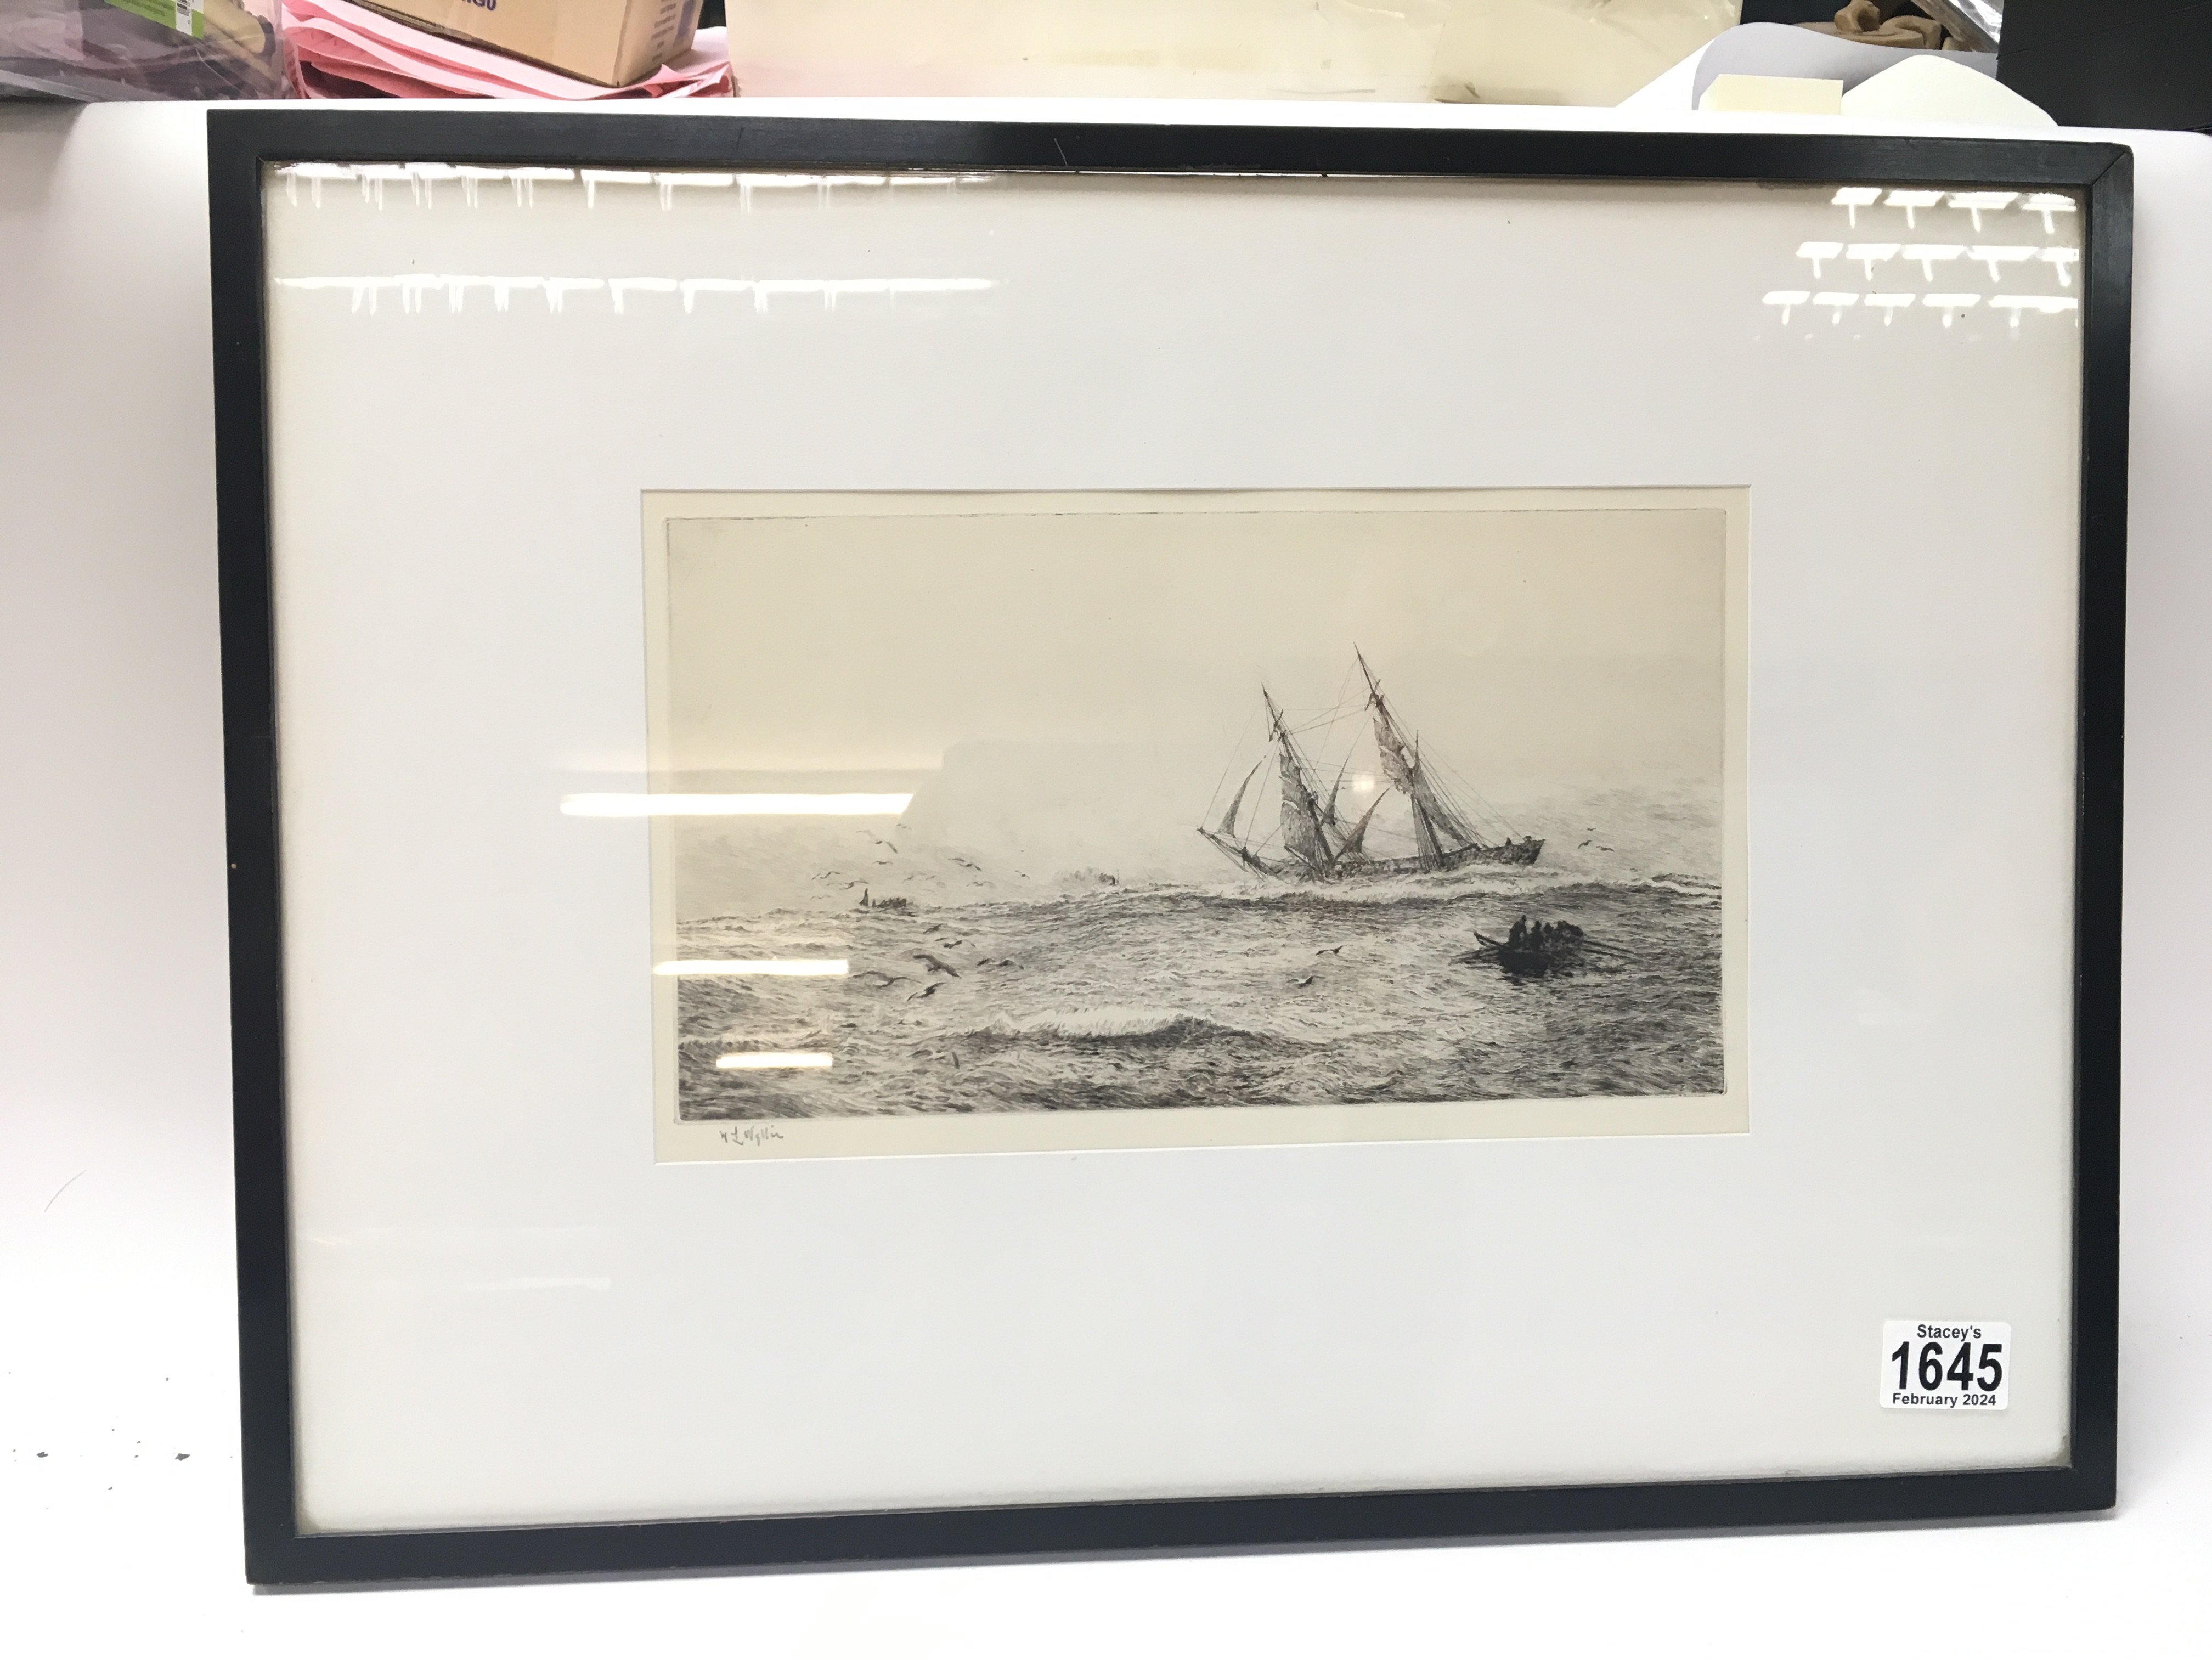 A framed wylie engraving - 2 mask sailing ship in